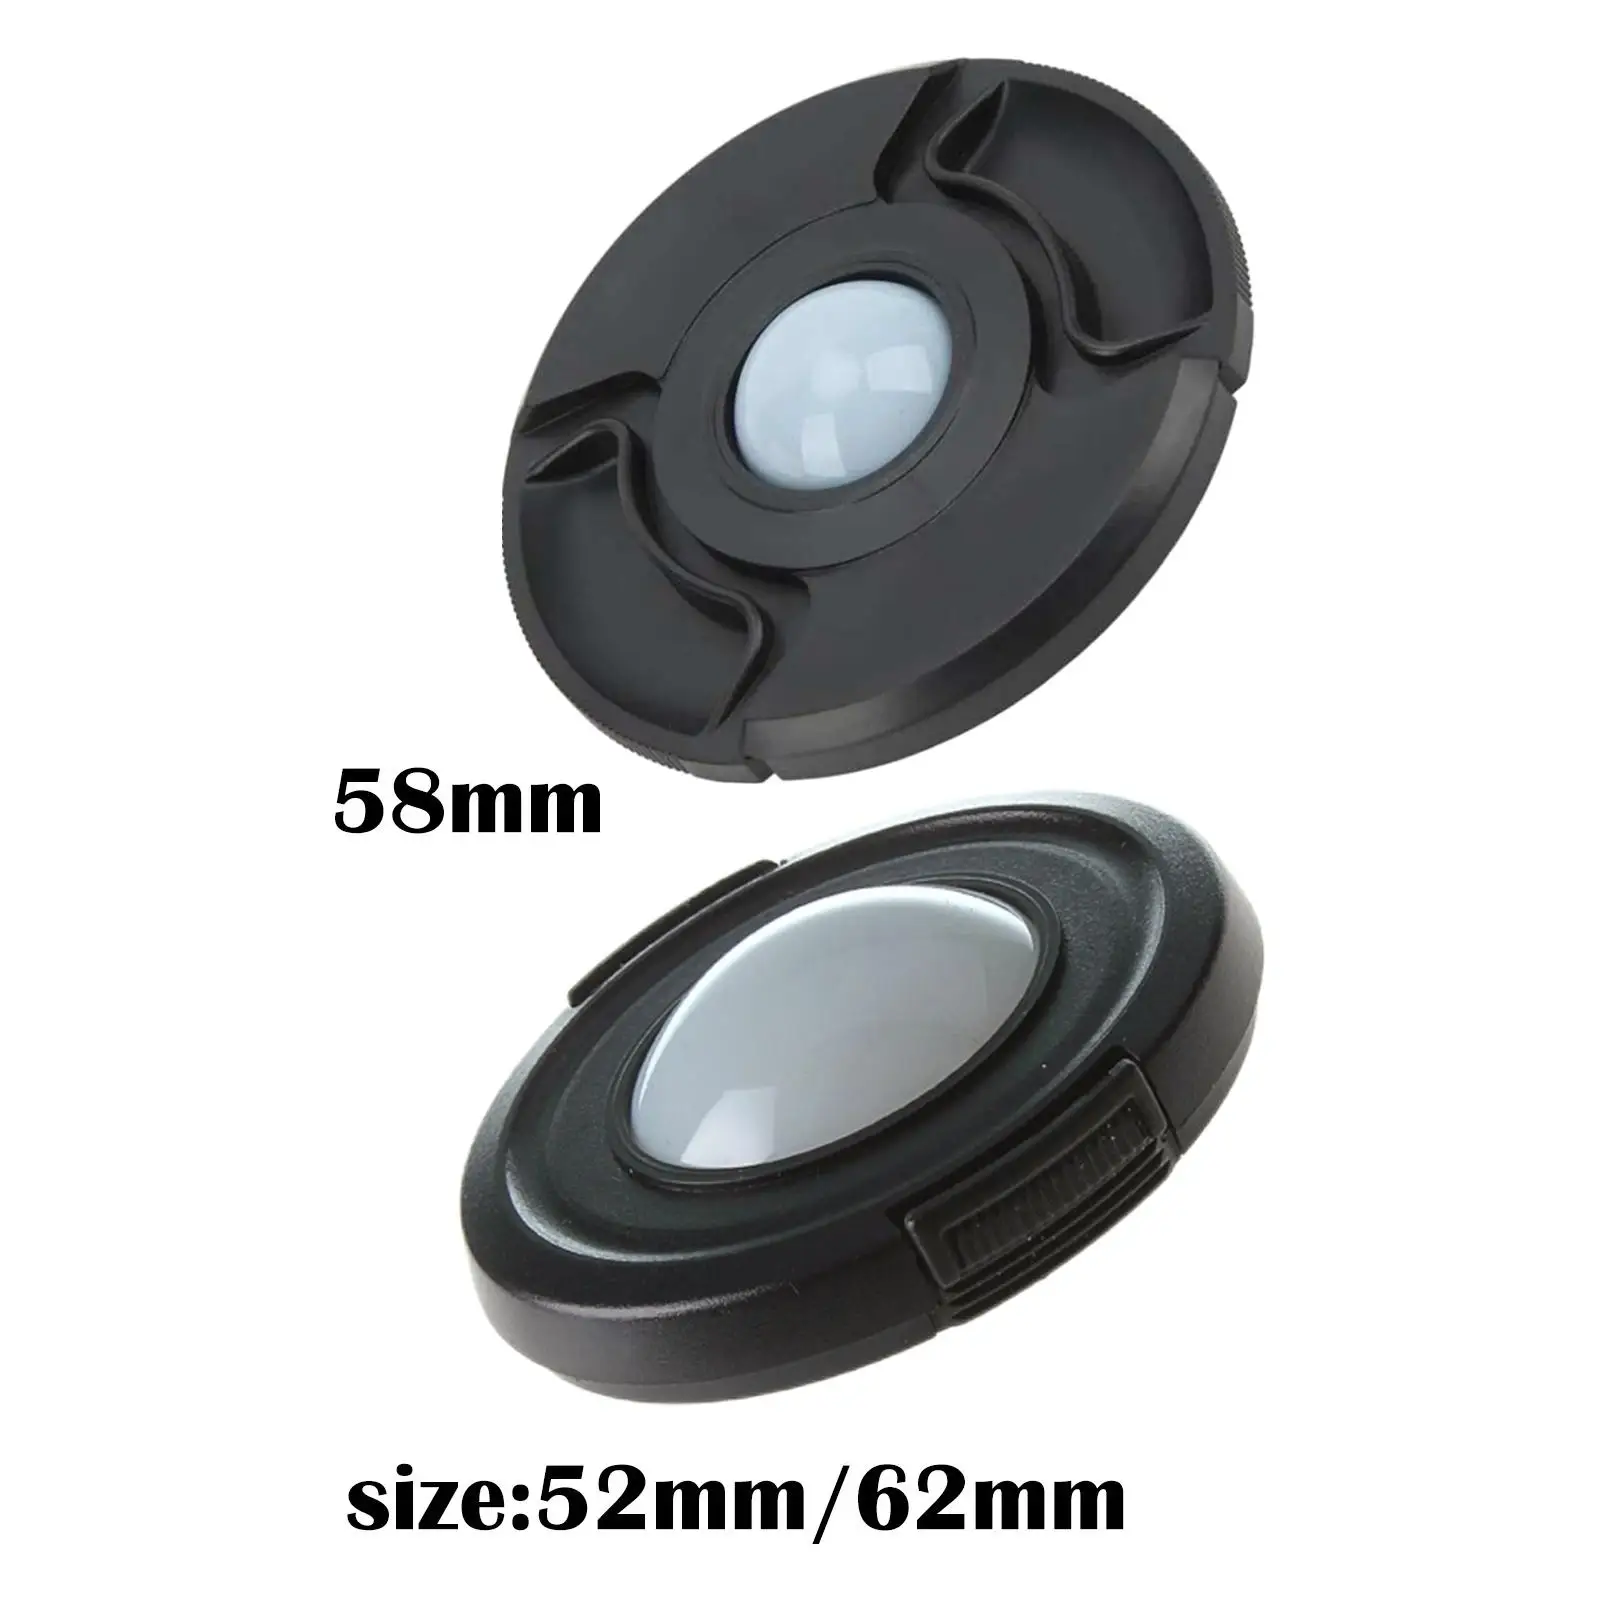 White Balance Lens Caps , to Facilitate Camera to Catch True Color Color Reproduction Wear Resistant High Performance Compact